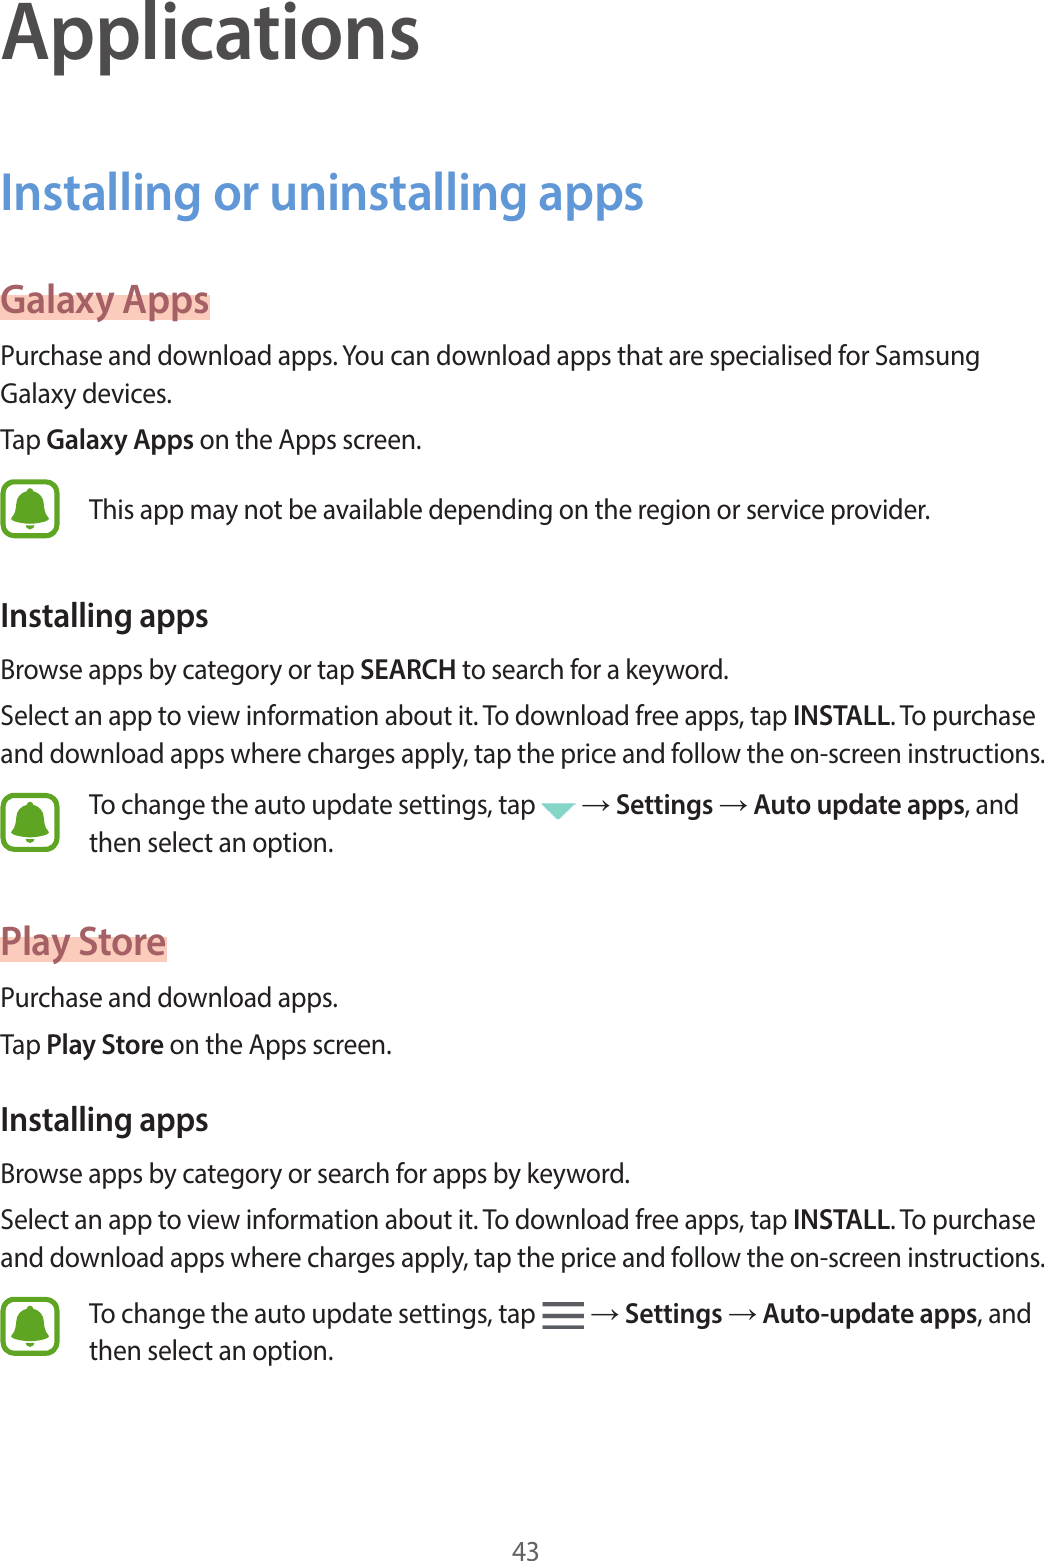 43ApplicationsInstalling or uninstalling appsGalaxy AppsPurchase and download apps. You can download apps that are specialised for Samsung Galaxy devices.Tap Galaxy Apps on the Apps screen.This app may not be available depending on the region or service provider.Installing appsBrowse apps by category or tap SEARCH to search for a keyword.Select an app to view information about it. To download free apps, tap INSTALL. To purchase and download apps where charges apply, tap the price and follow the on-screen instructions.To change the auto update settings, tap   → Settings → Auto update apps, and then select an option.Play StorePurchase and download apps.Tap Play Store on the Apps screen.Installing appsBrowse apps by category or search for apps by keyword.Select an app to view information about it. To download free apps, tap INSTALL. To purchase and download apps where charges apply, tap the price and follow the on-screen instructions.To change the auto update settings, tap   → Settings → Auto-update apps, and then select an option.